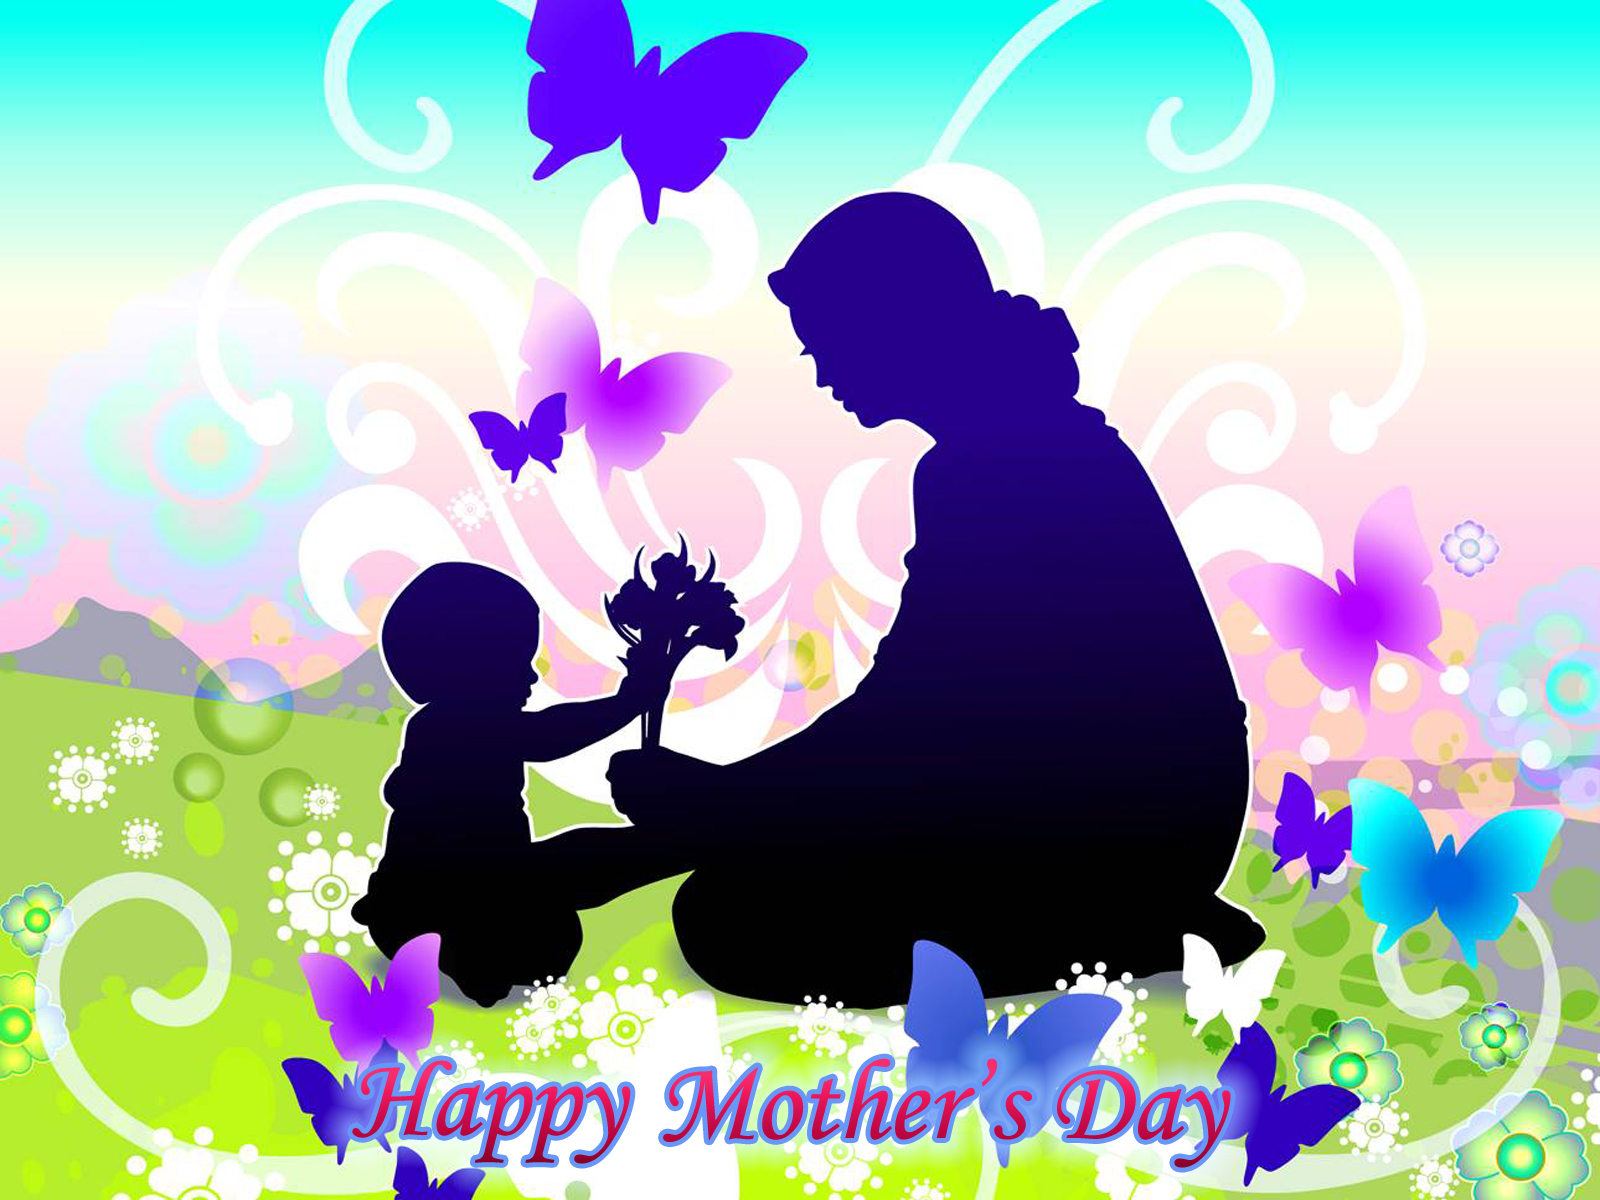 Happy Mothers Day Background Wallpaper 2016 - Mothers Day